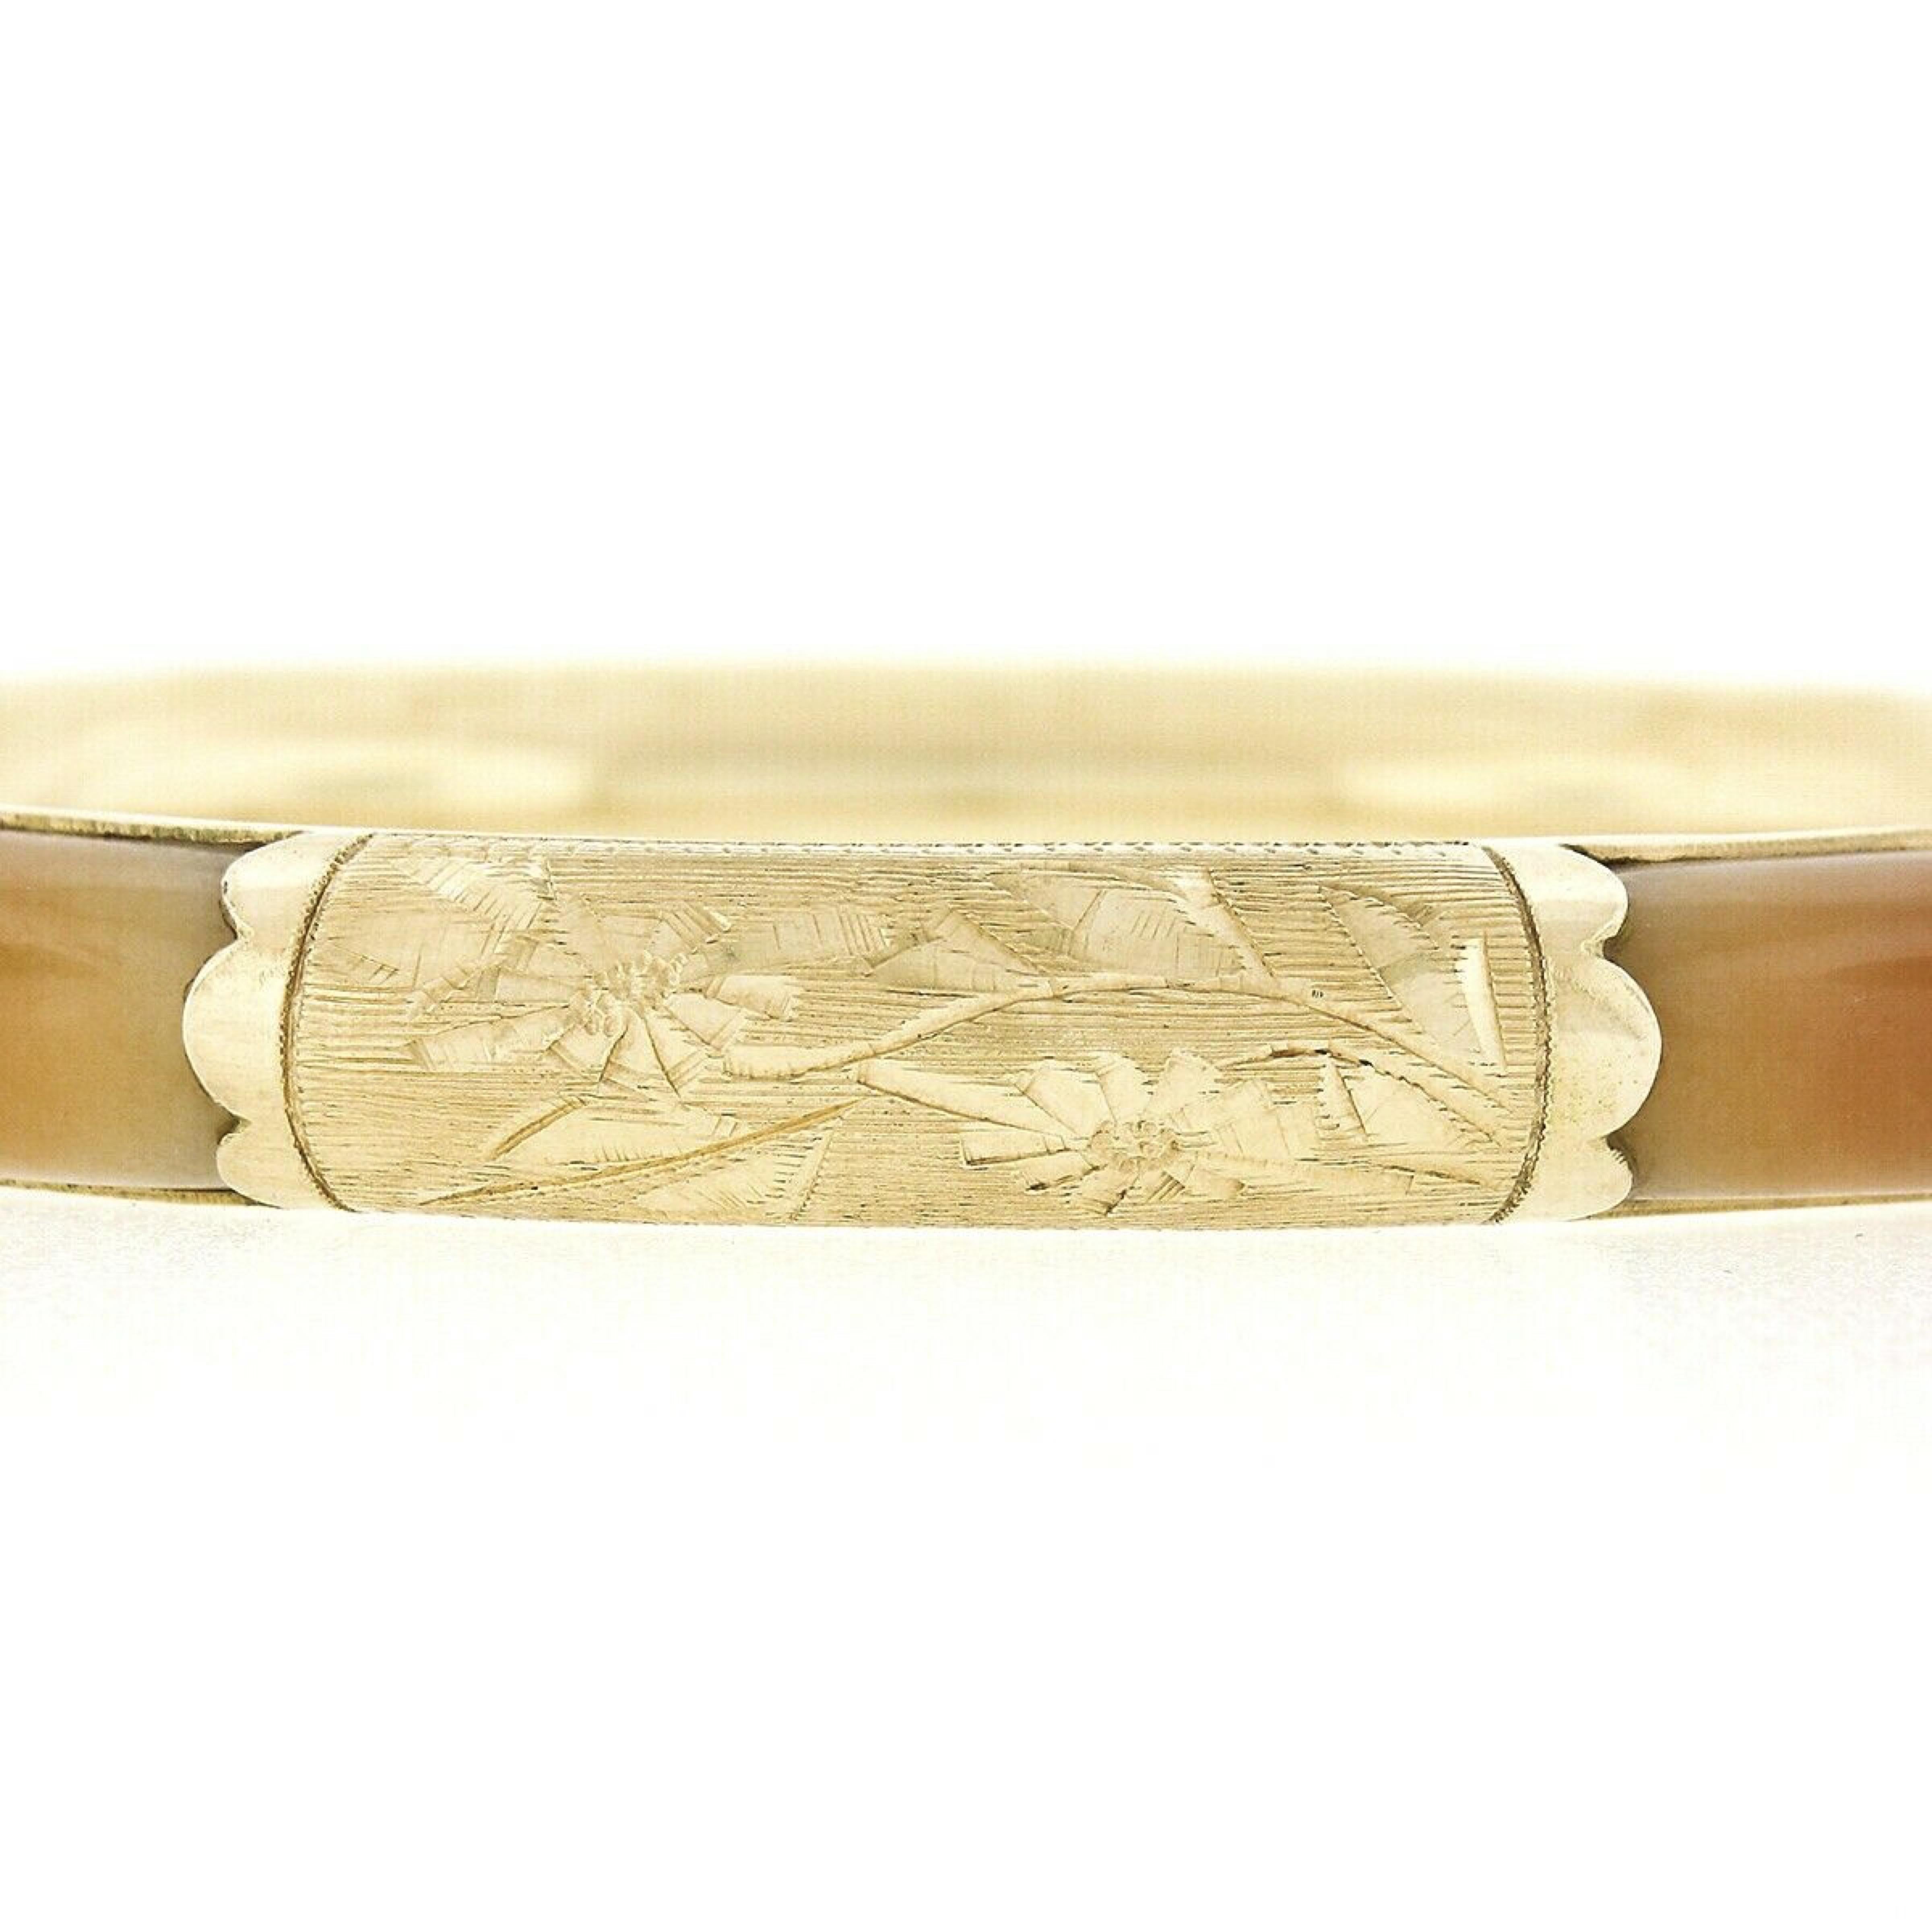 This beautiful vintage bangle bracelet is very well crafted in solid 14k yellow gold and features fine quality natural jade stones neatly stationed and set throughout. The 4 custom cabochon cut stones have a light to medium creamy orange color that